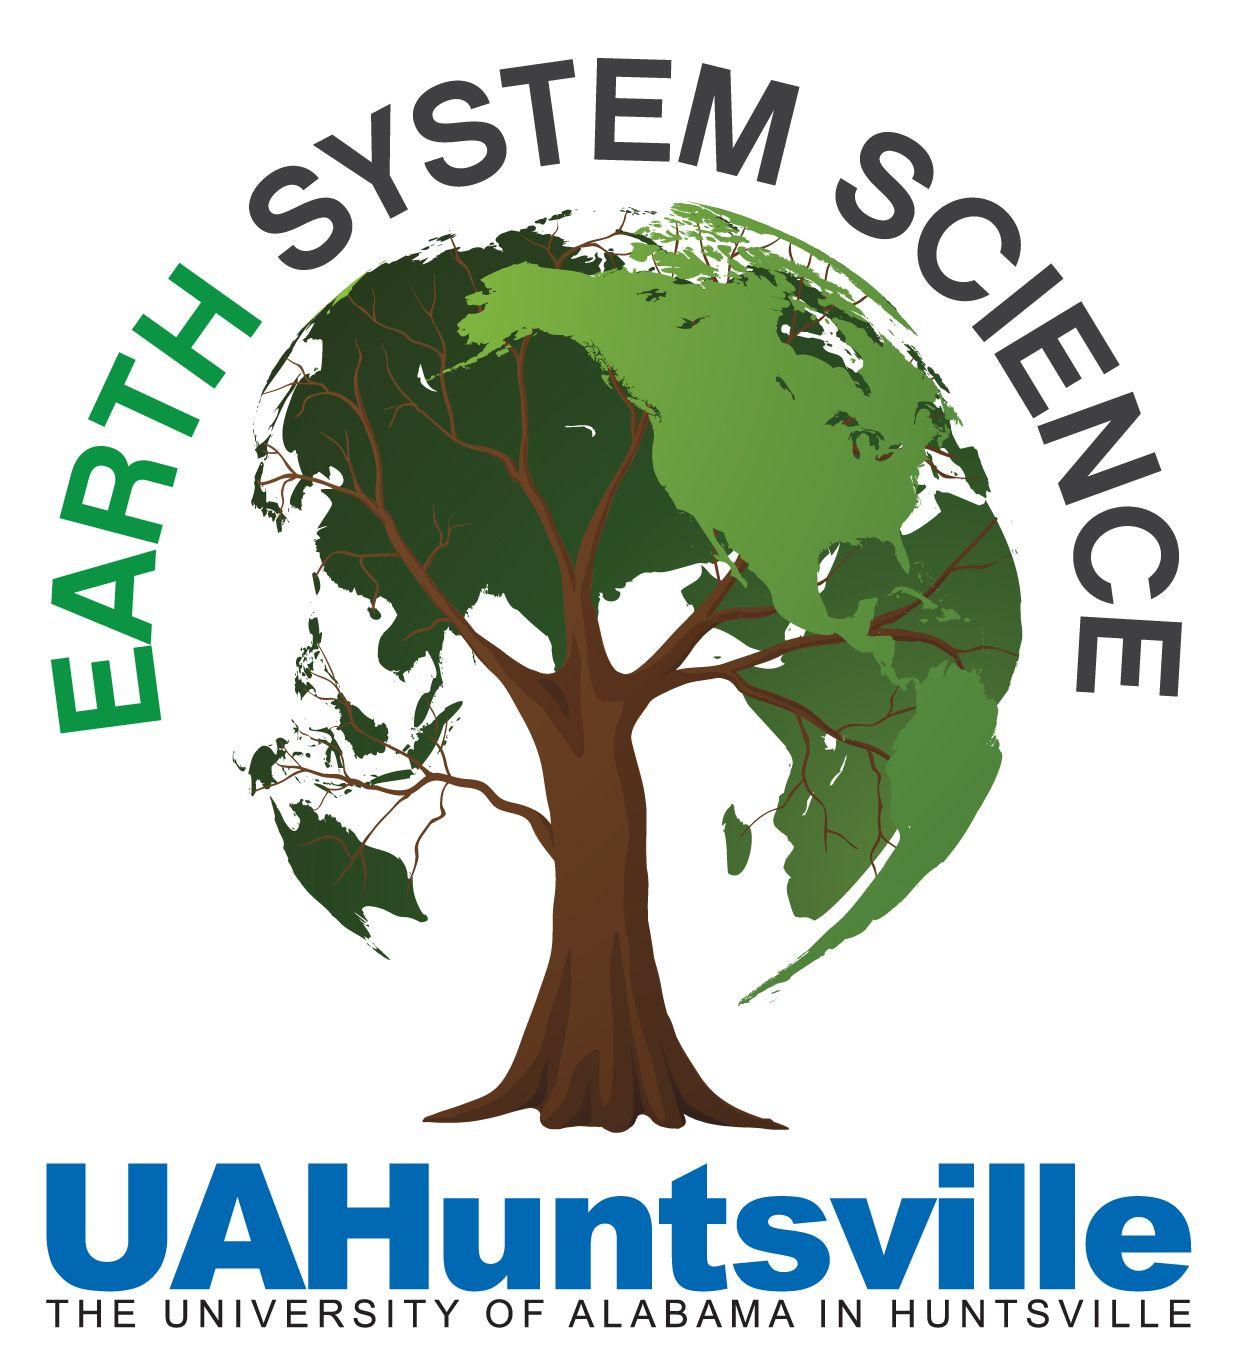 Earth Science Logo - The Atmospheric Science Department at UAHuntsville